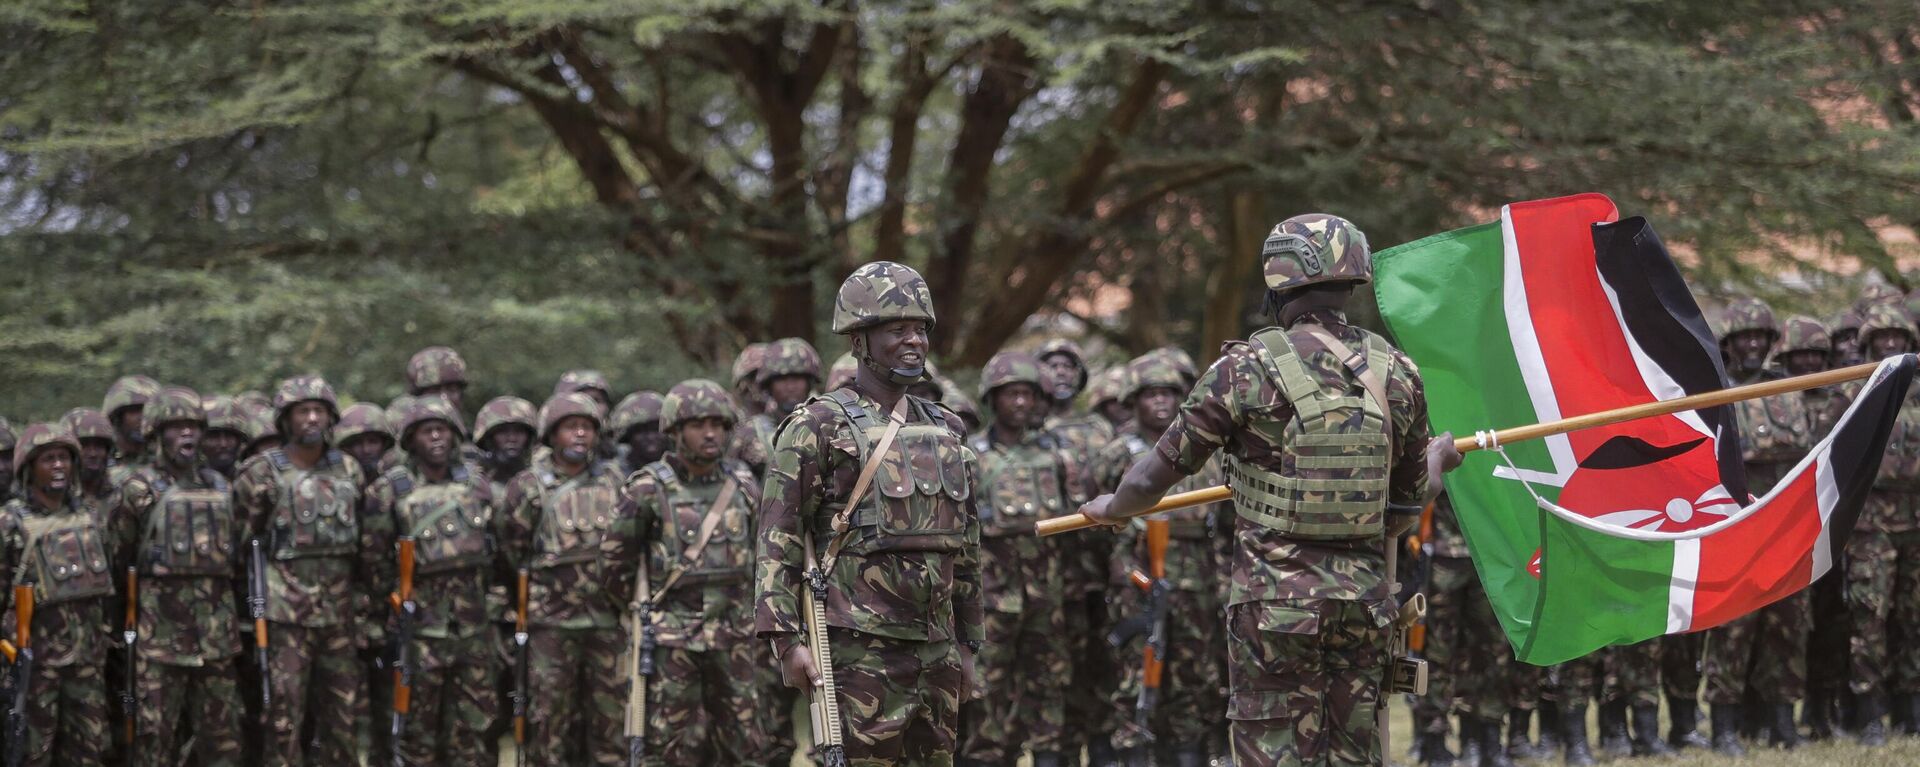 Members of the Kenya Defence Forces (KDF) take part in a flag-handover ceremony, ahead of a future deployment to eastern Congo as part of the newly-created East African Community Regional Force (EACRF), at the Embakasi garrison in Nairobi, Kenya Wednesday, Nov. 2, 2022. - Sputnik International, 1920, 13.11.2022